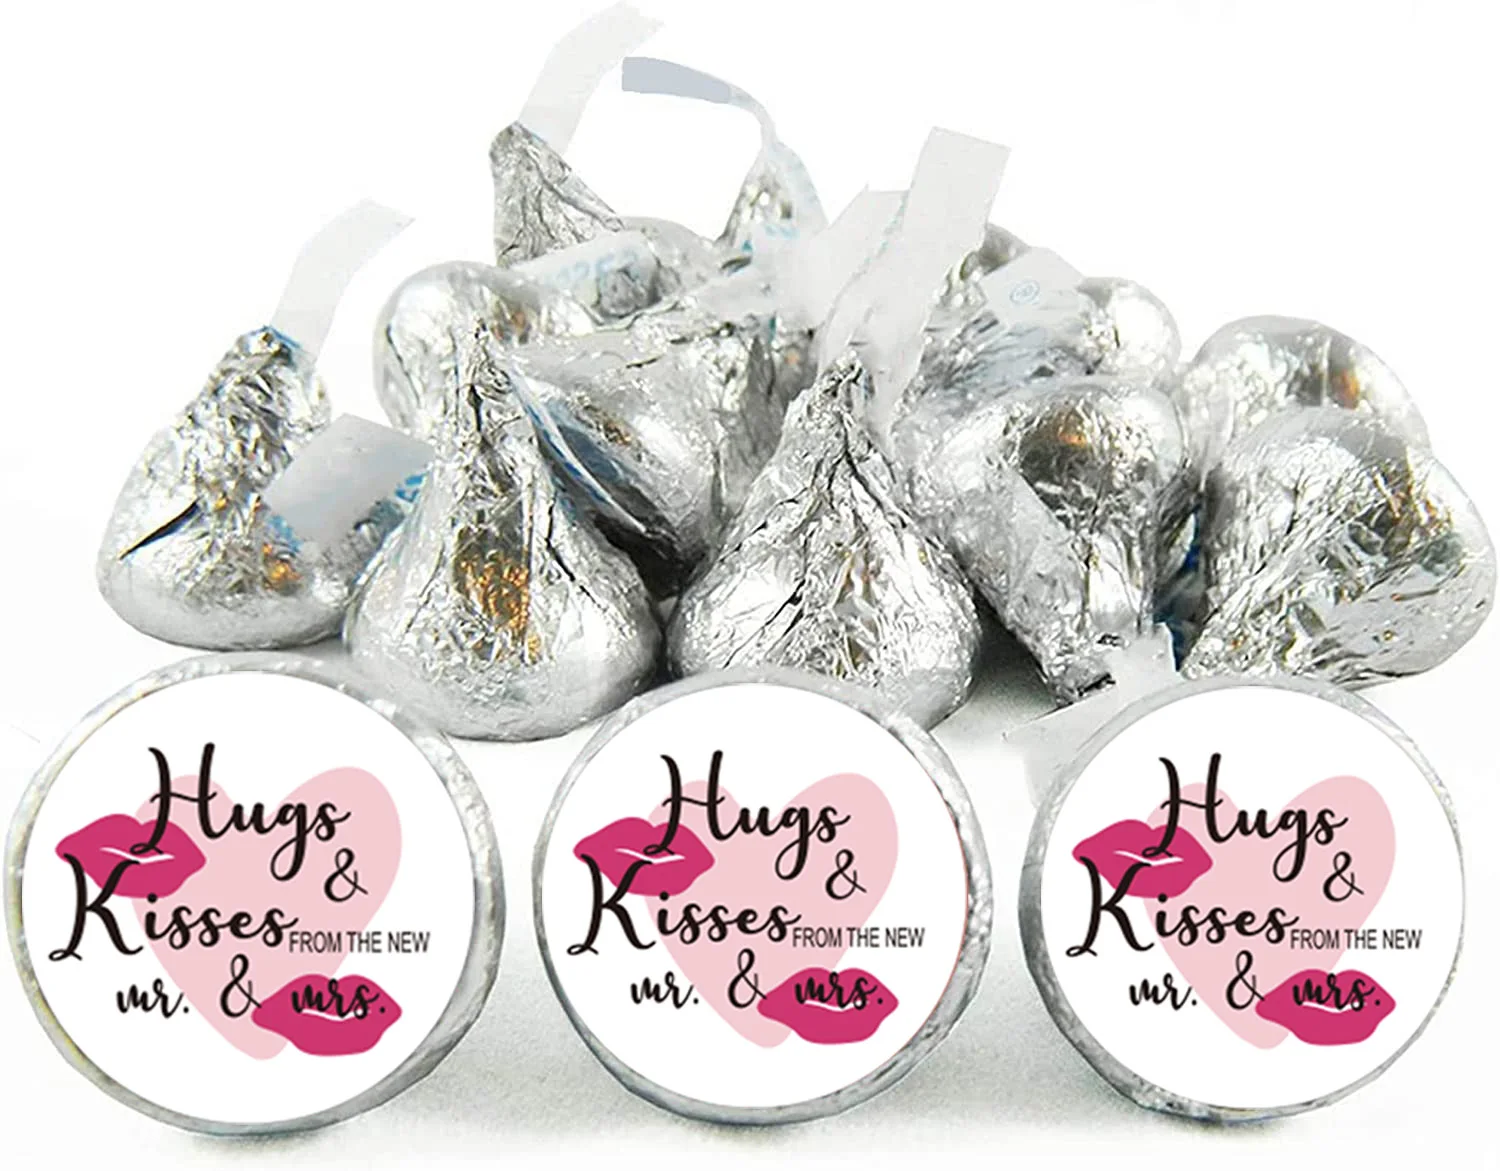 

120Pcs Hugs and Kisses from The New Mr and Mrs Stickers 2inches Wedding Stickers Chocolate Label for Weddings Bridal Showers